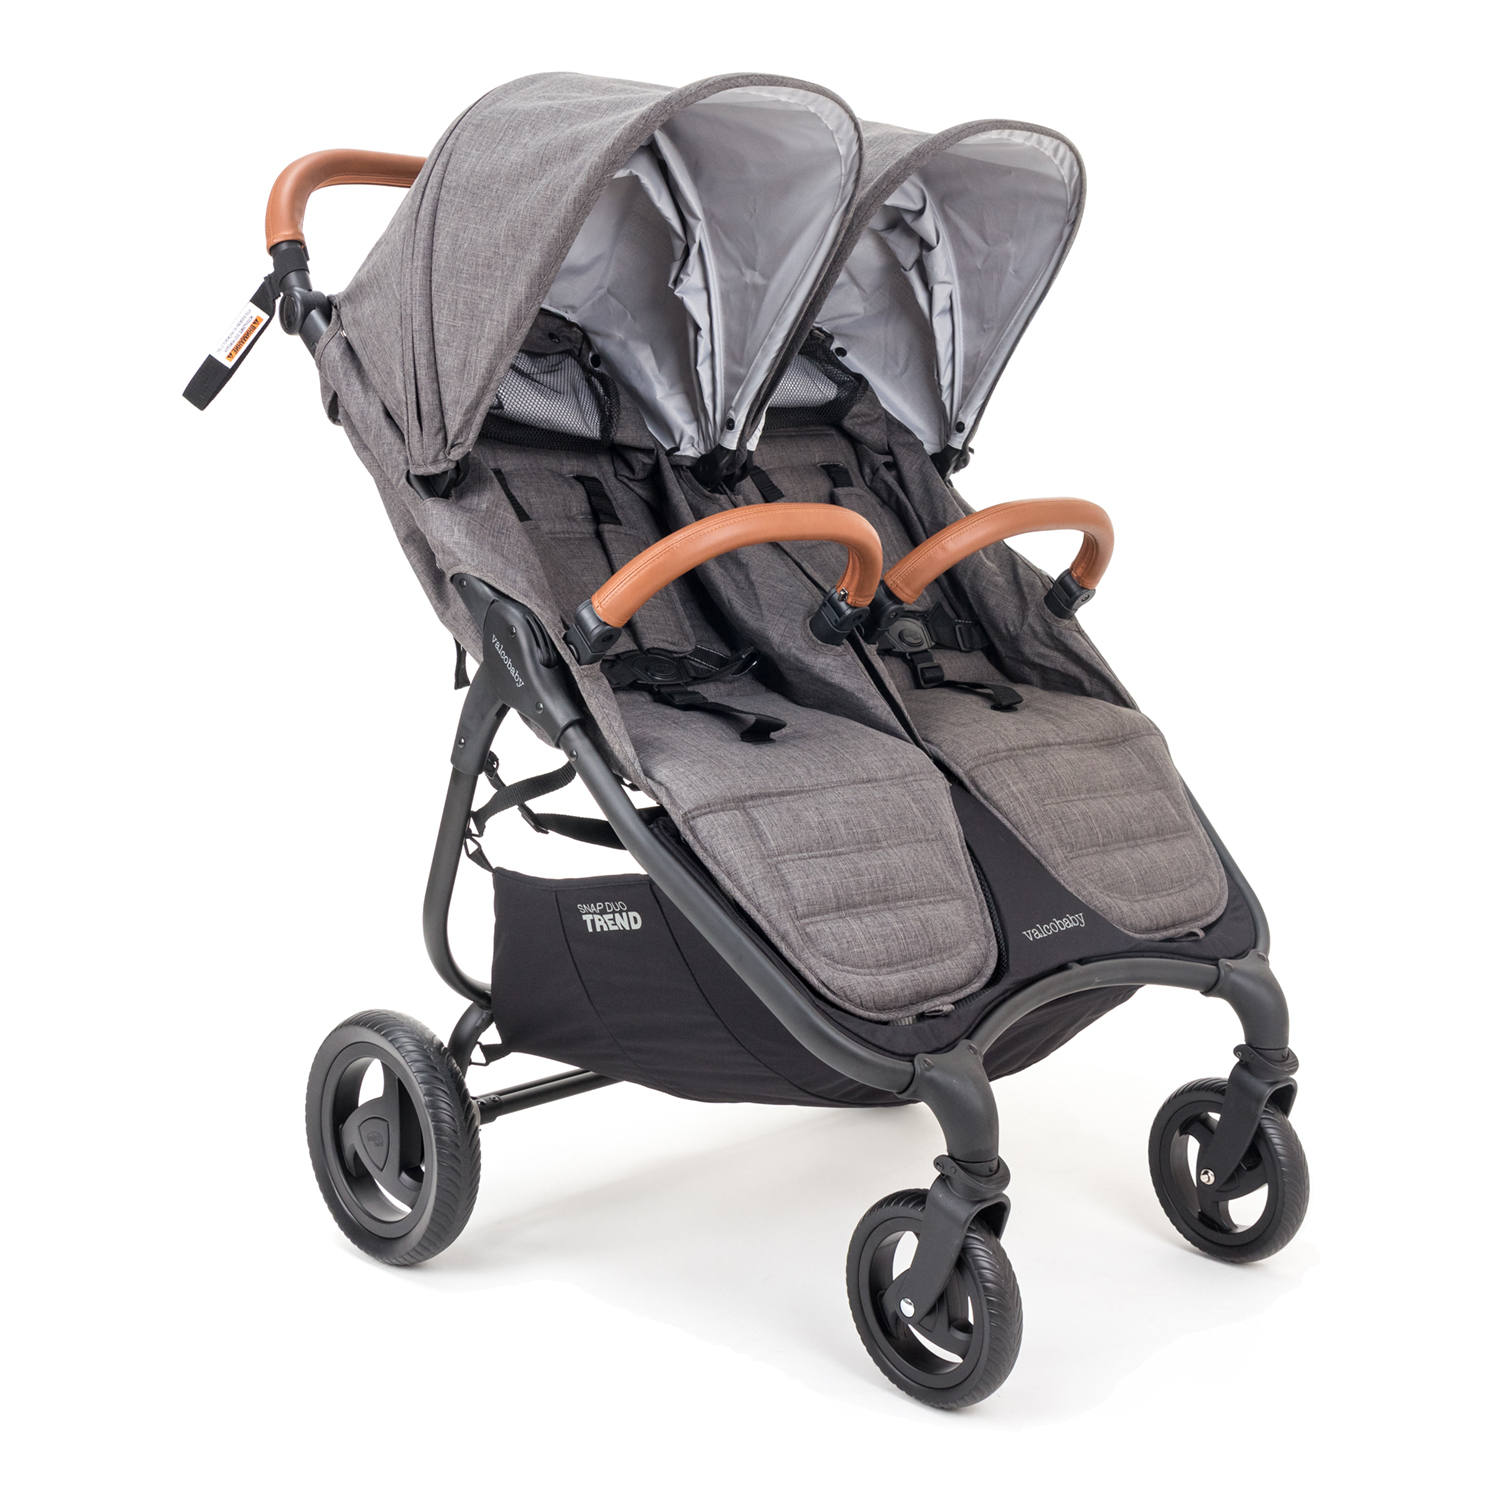 Прогулочная коляска Snap Duo Trend / Charcoal Valco Baby прогулочная коляска valco baby snap trend charcoal 9812